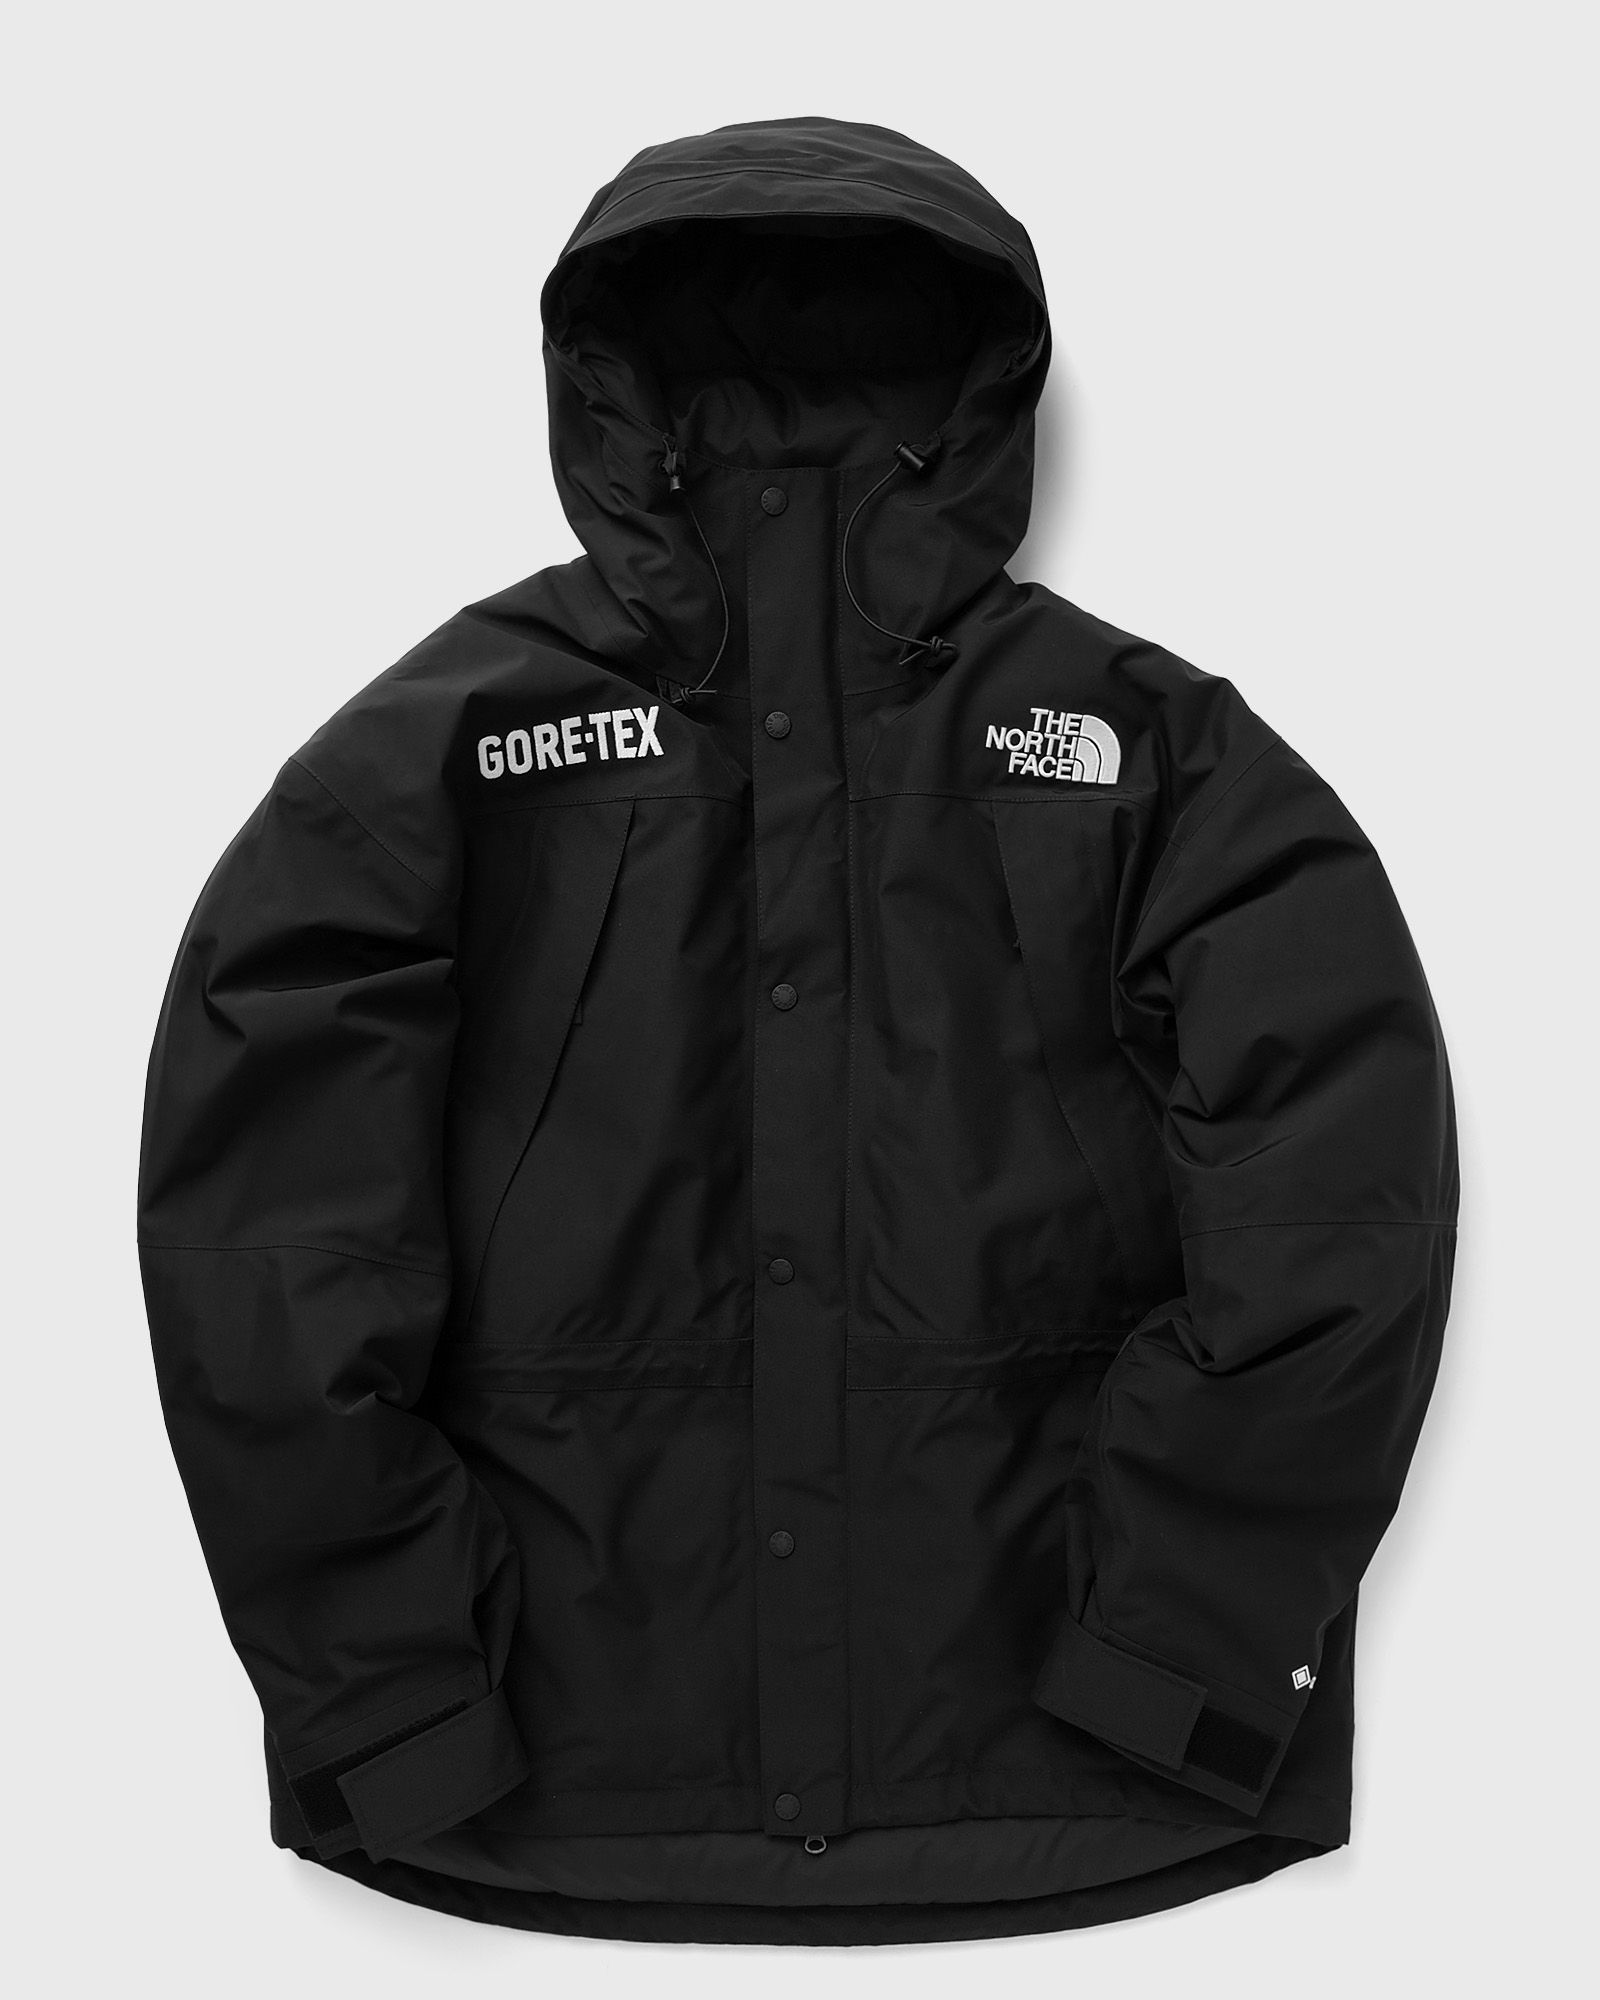 The North Face - gtx mtn guide insualted jacket men shell jackets black in größe:l